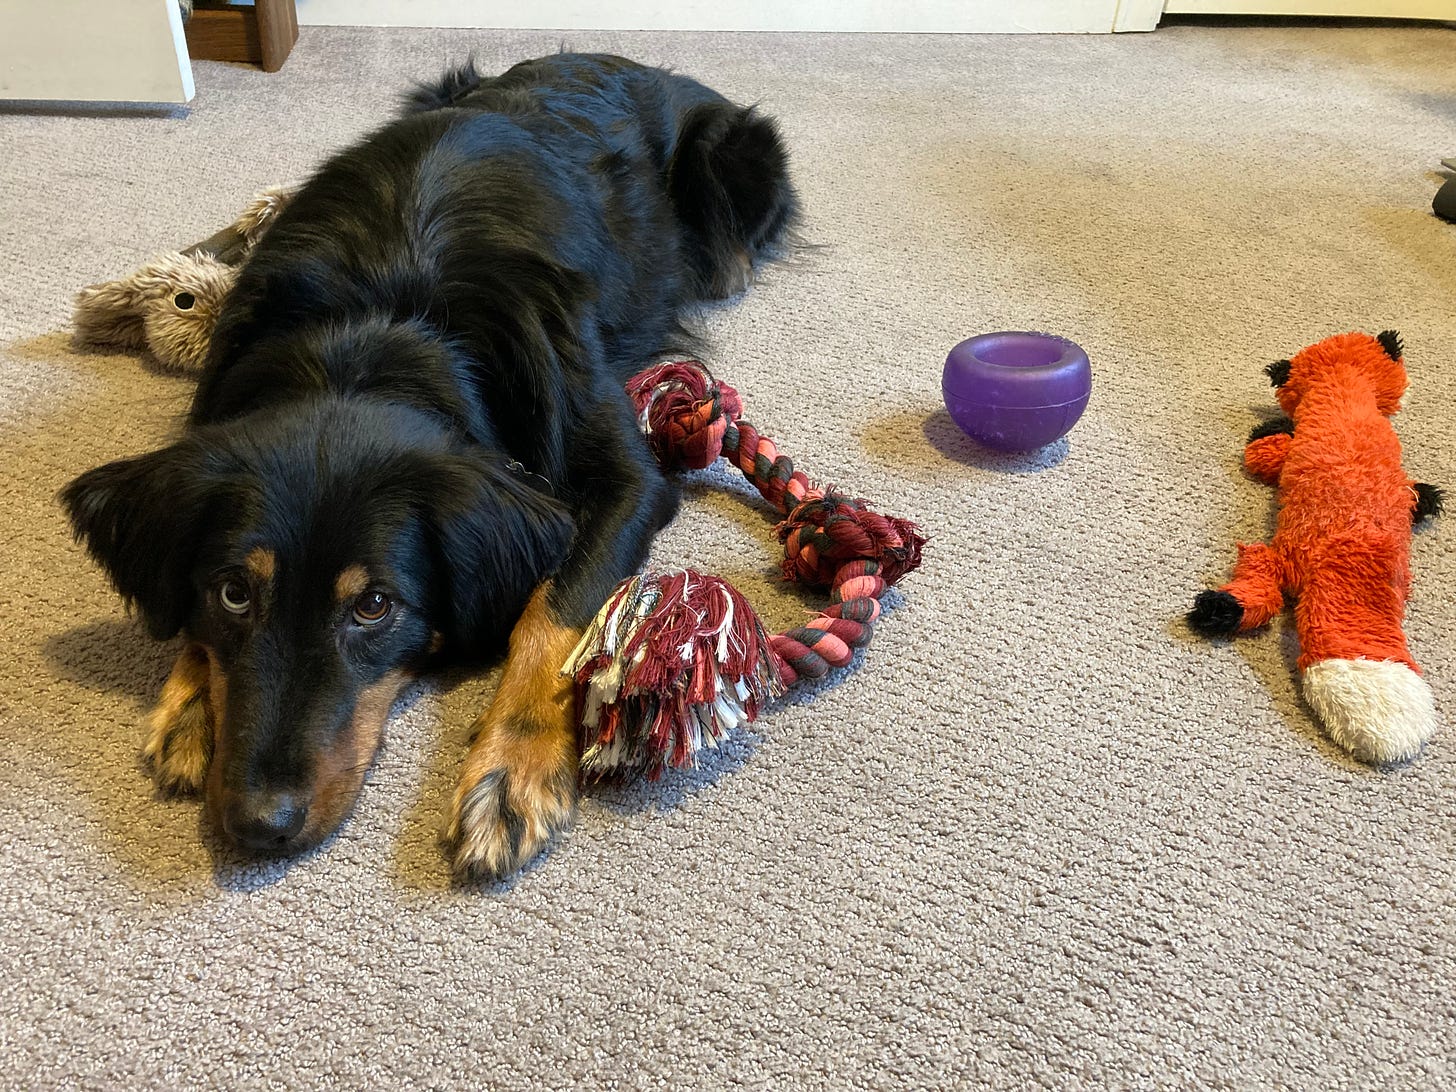 Black and brown dog surrounded by toys, staring at camera